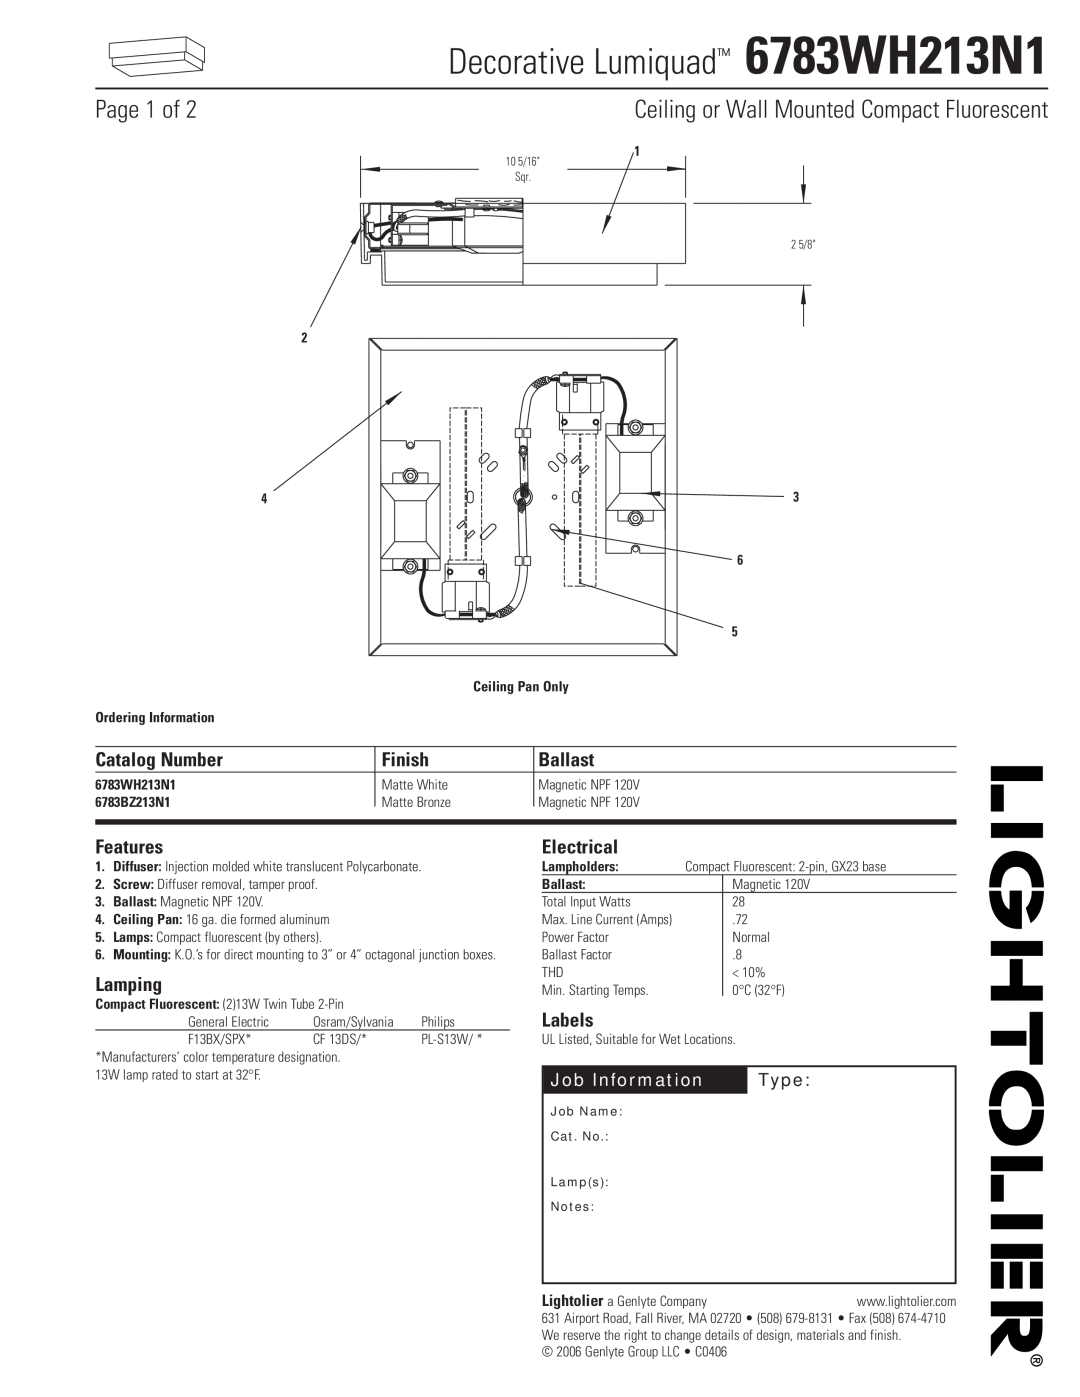 Lightolier manual Decorative Lumiquad 6783WH213N1, Page 1 of, Ceiling or Wall Mounted Compact Fluorescent, Type, Finish 